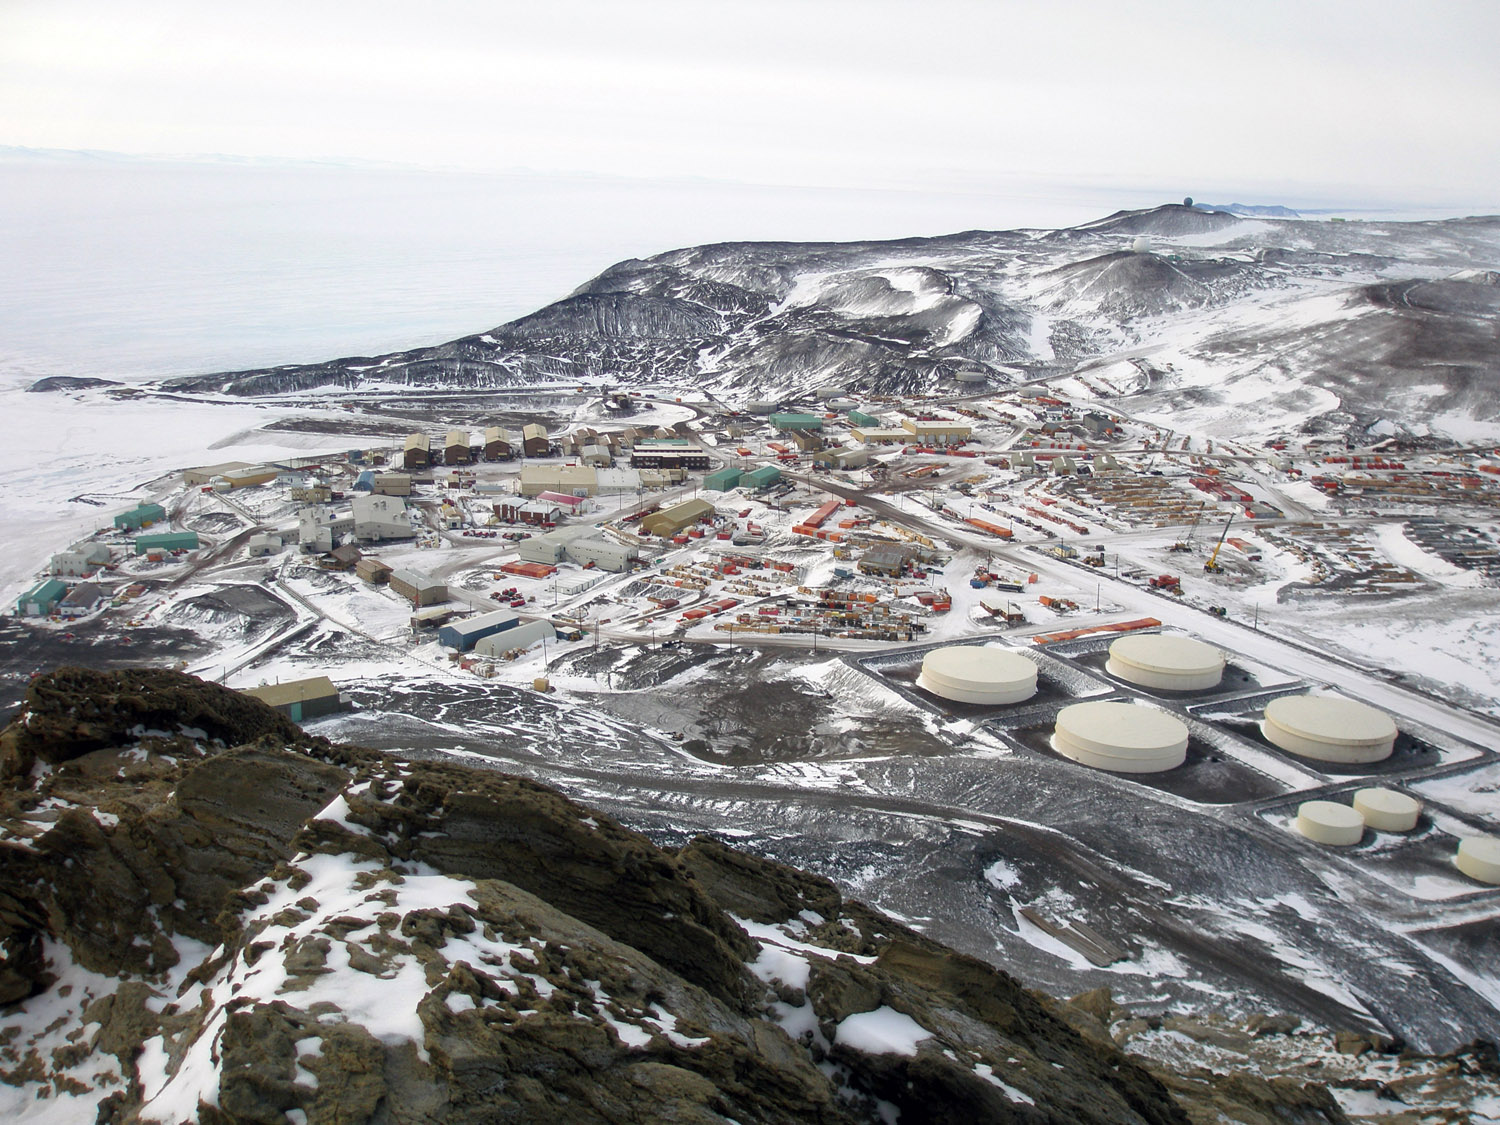 McMurdo Station, seen while ascending Observation Hill